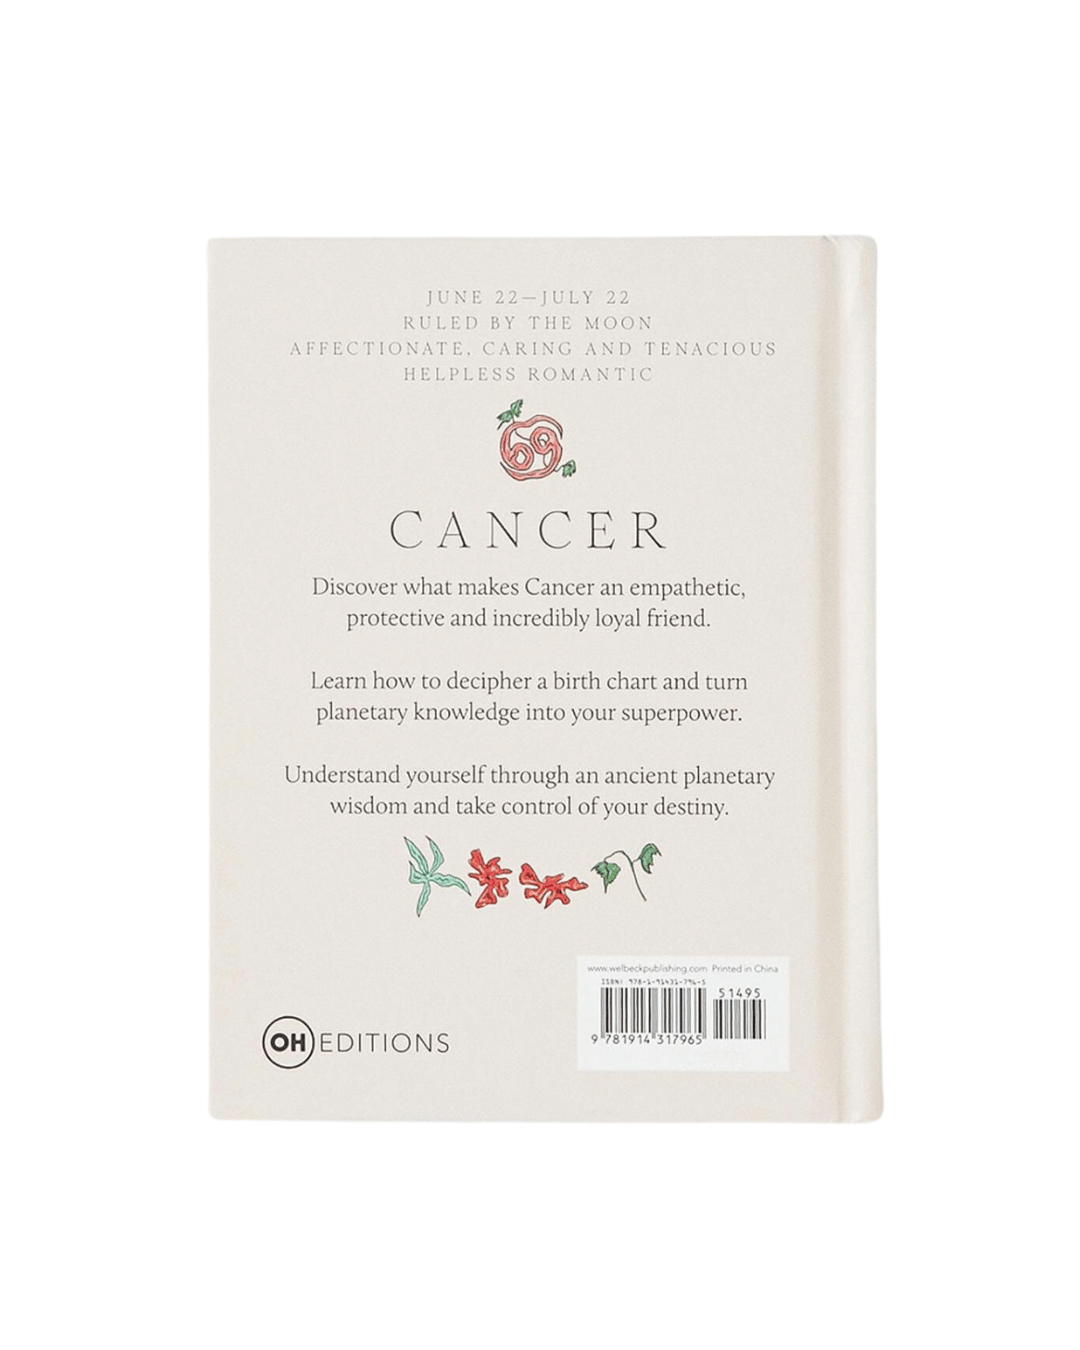 Cancer Book by Liberty Phi